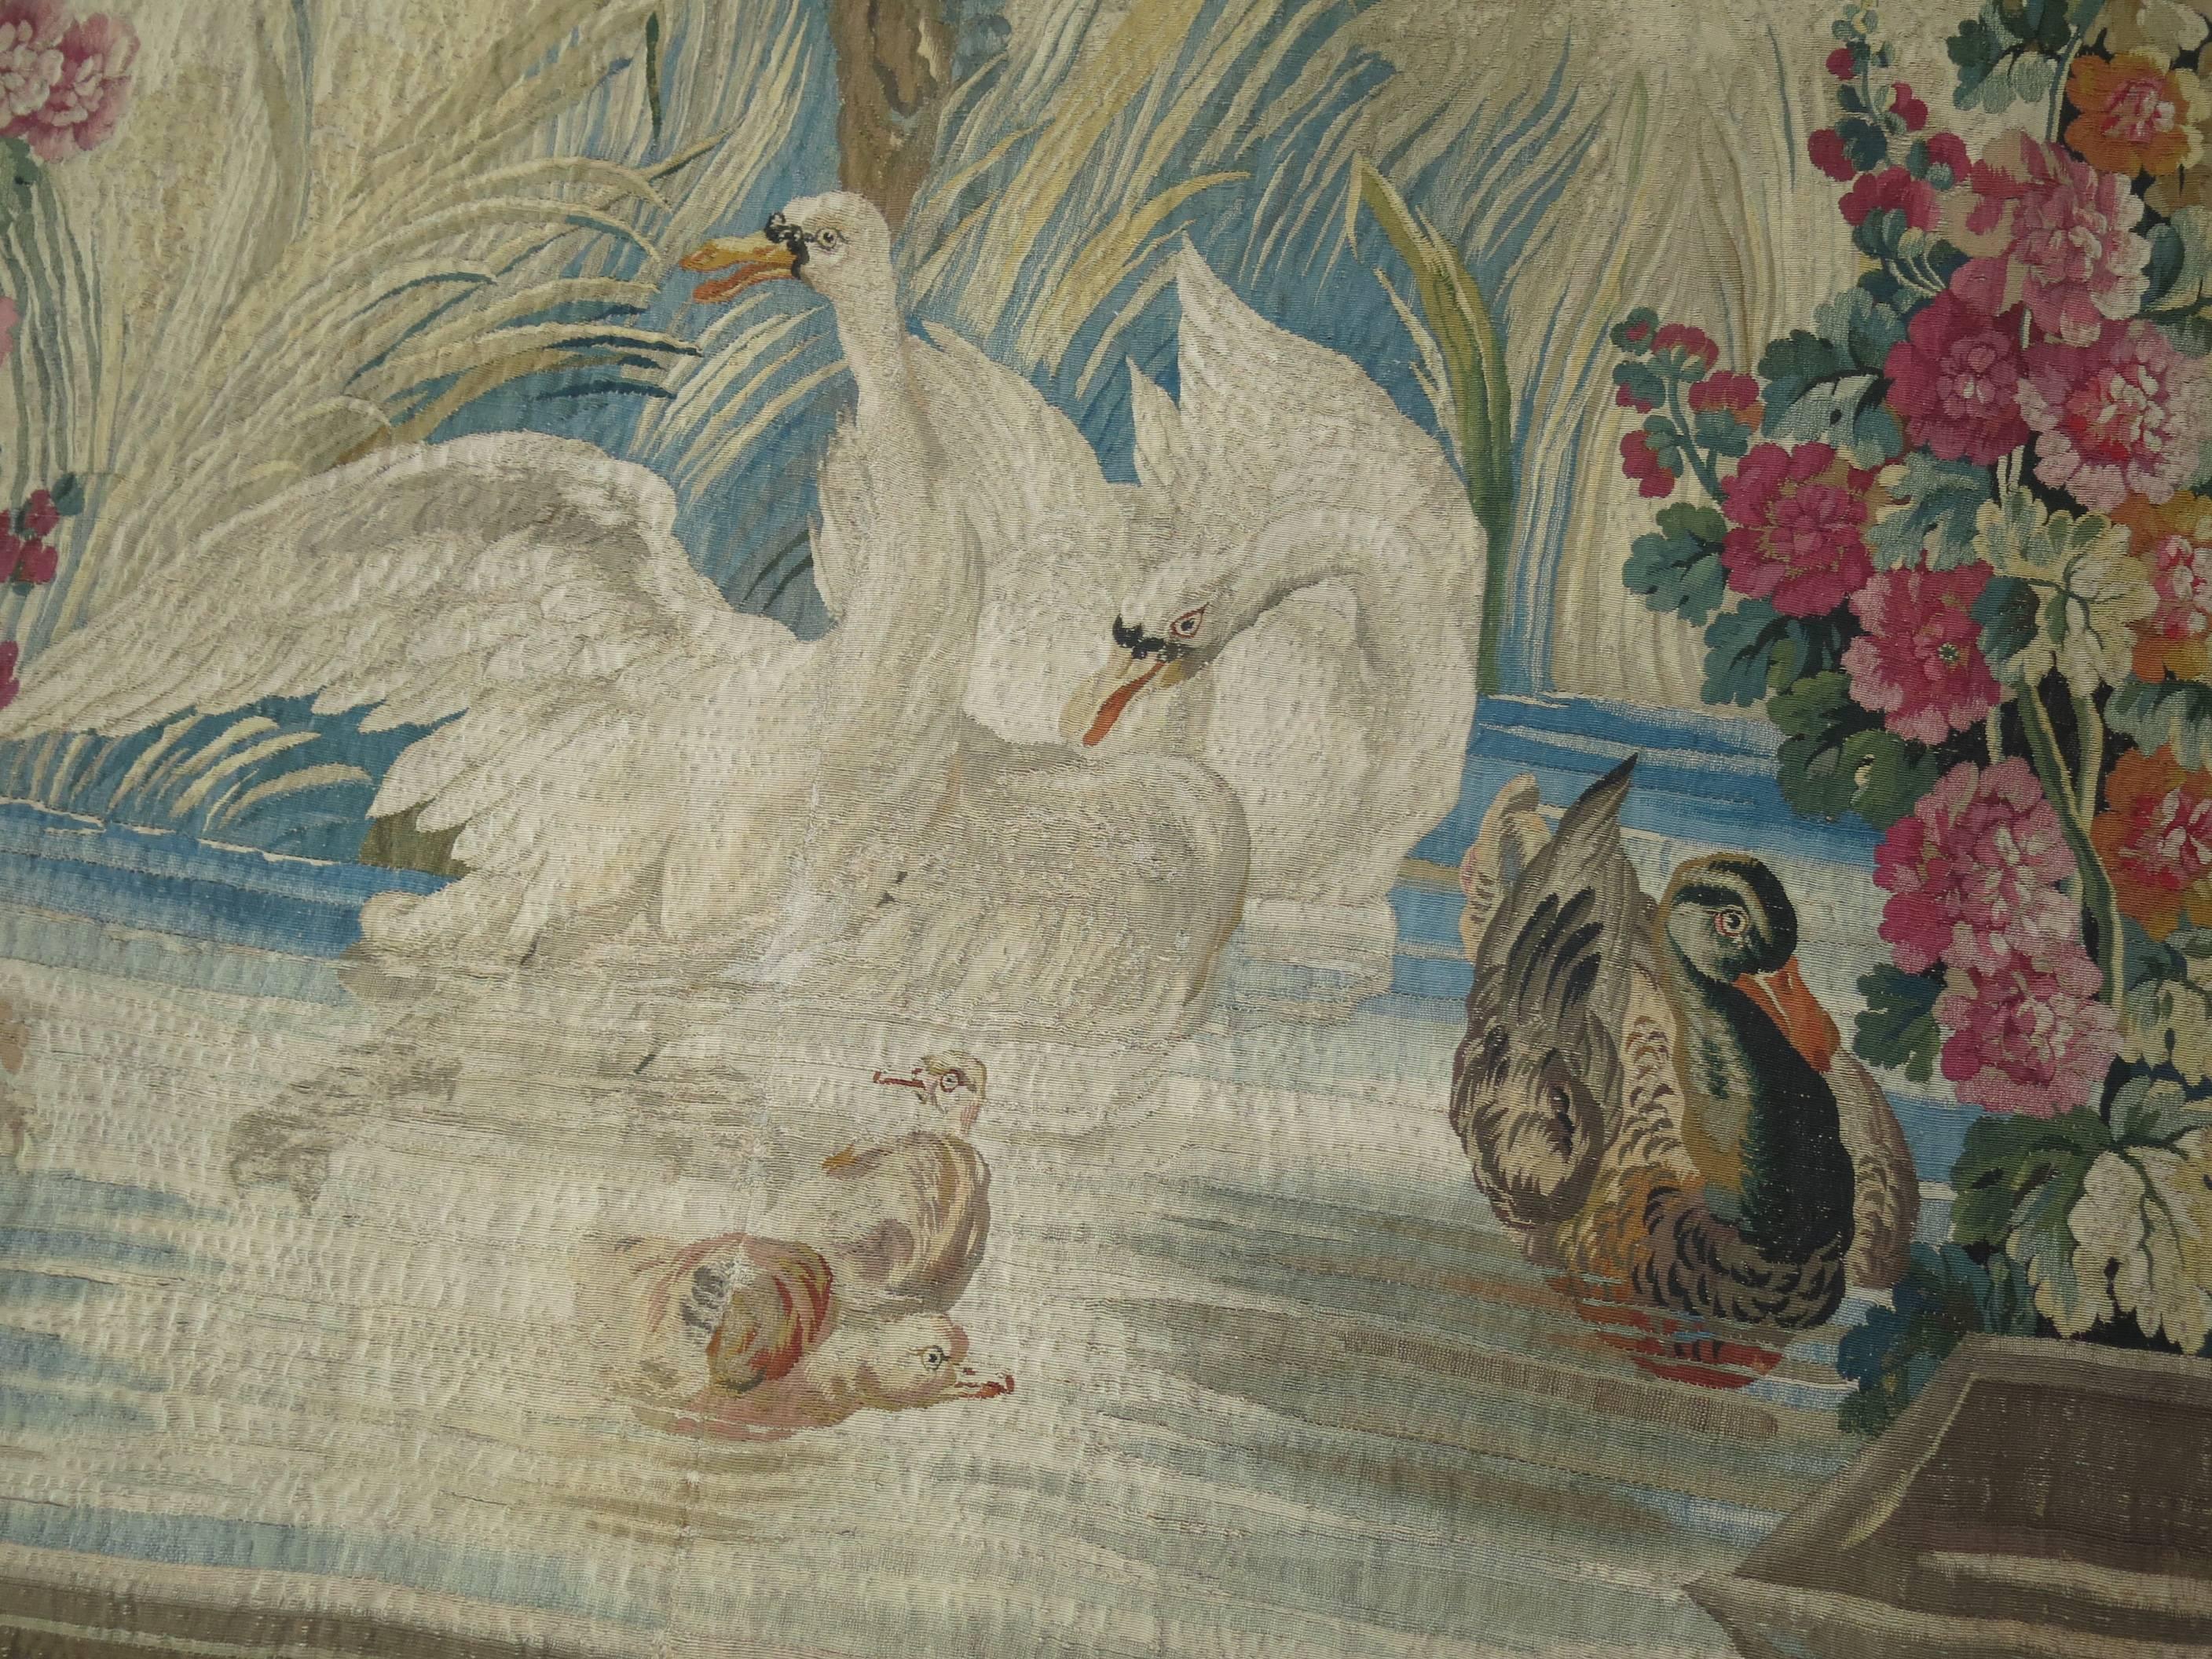 French Provincial Swans Ducks 18th Century Aubusson French Tapestry Panel For Sale